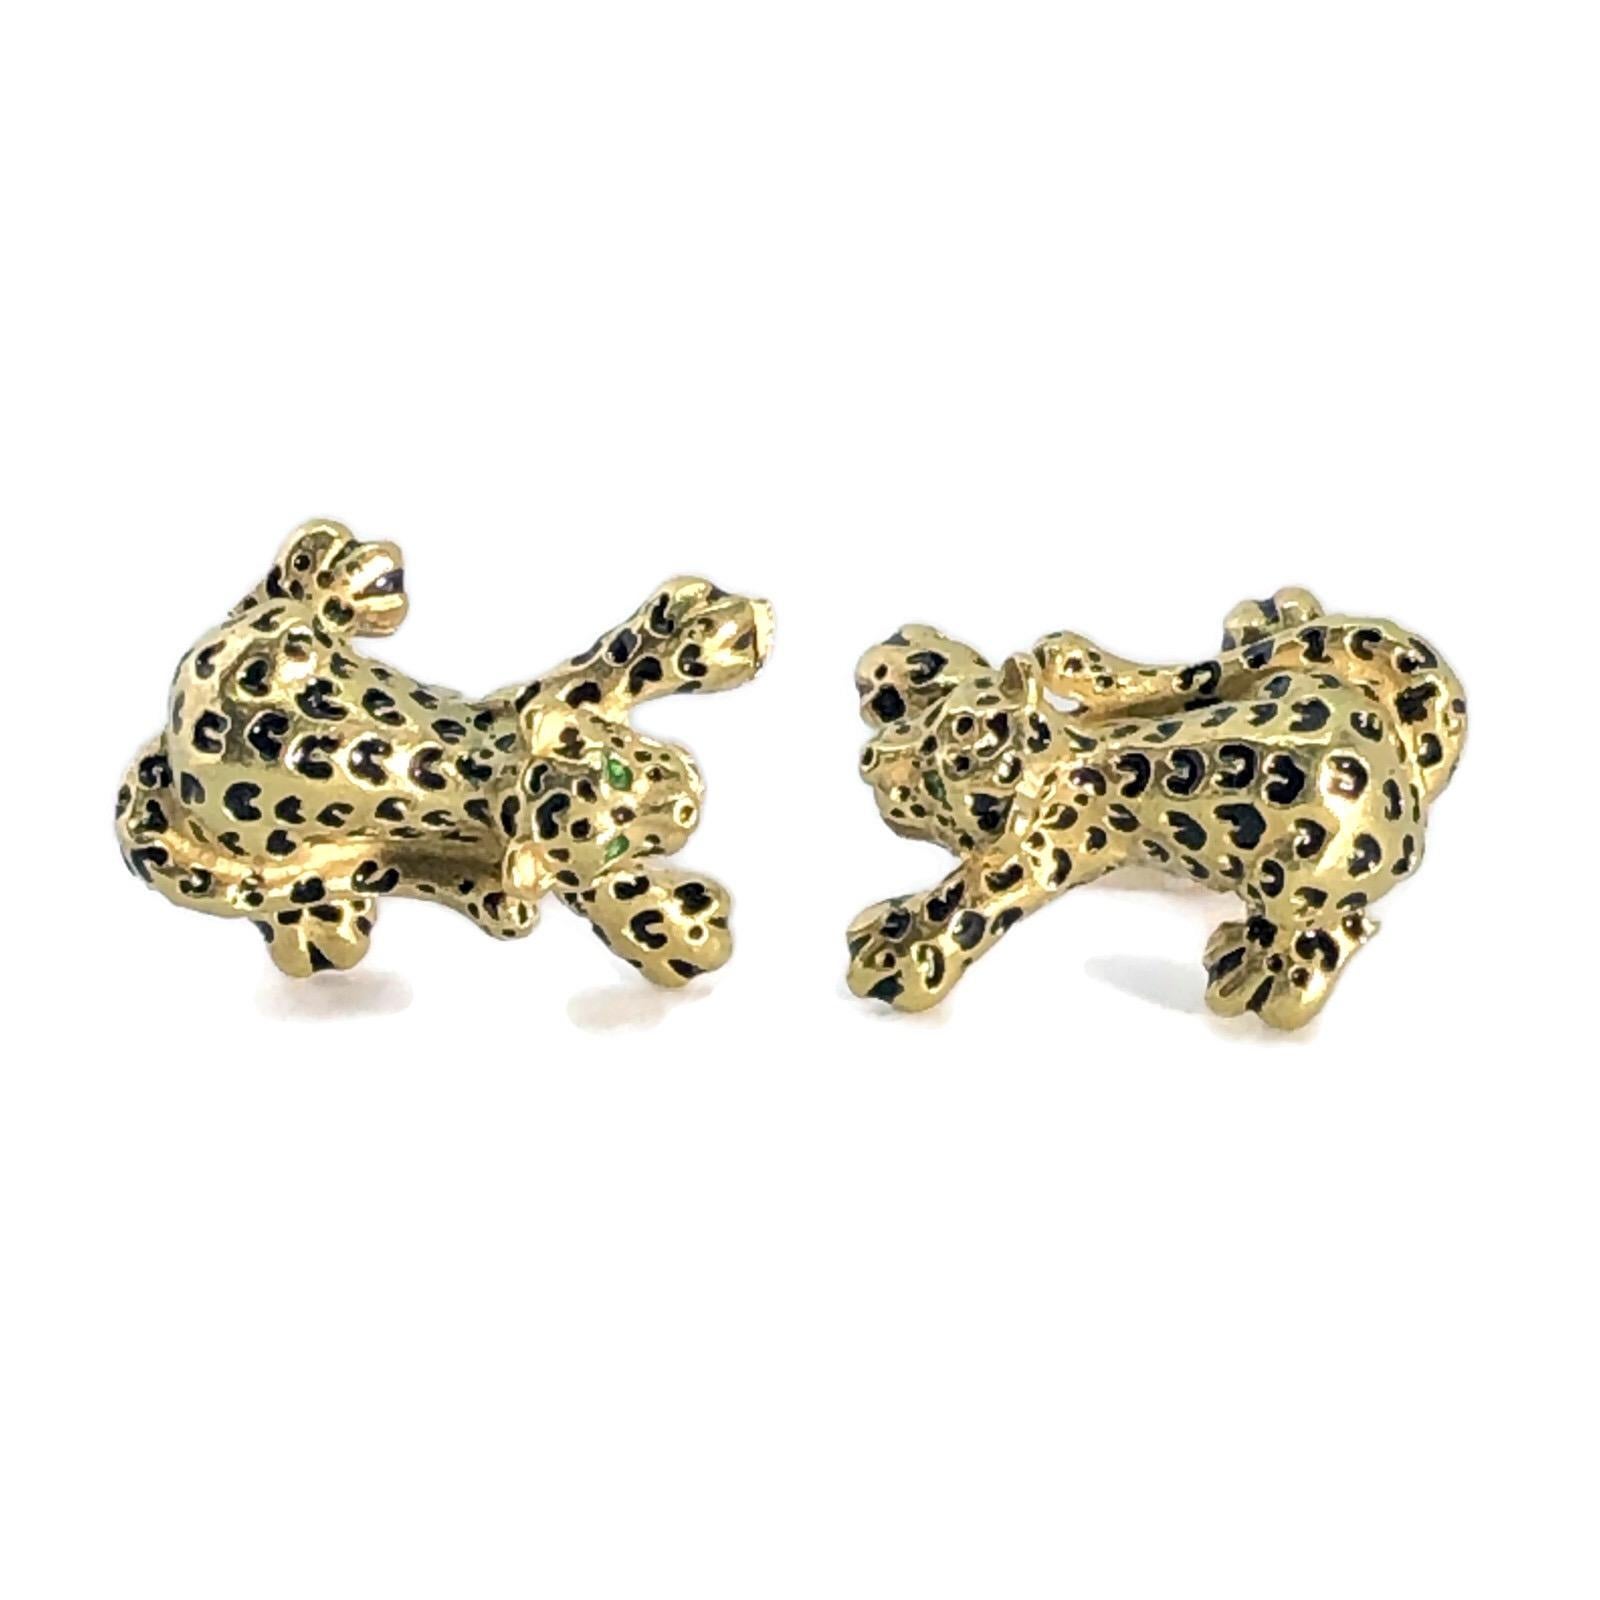 Vintage Unisex Cufflinks of Tigers Made In Italy  In 18k Gold With Emerald Eyes For Sale 2